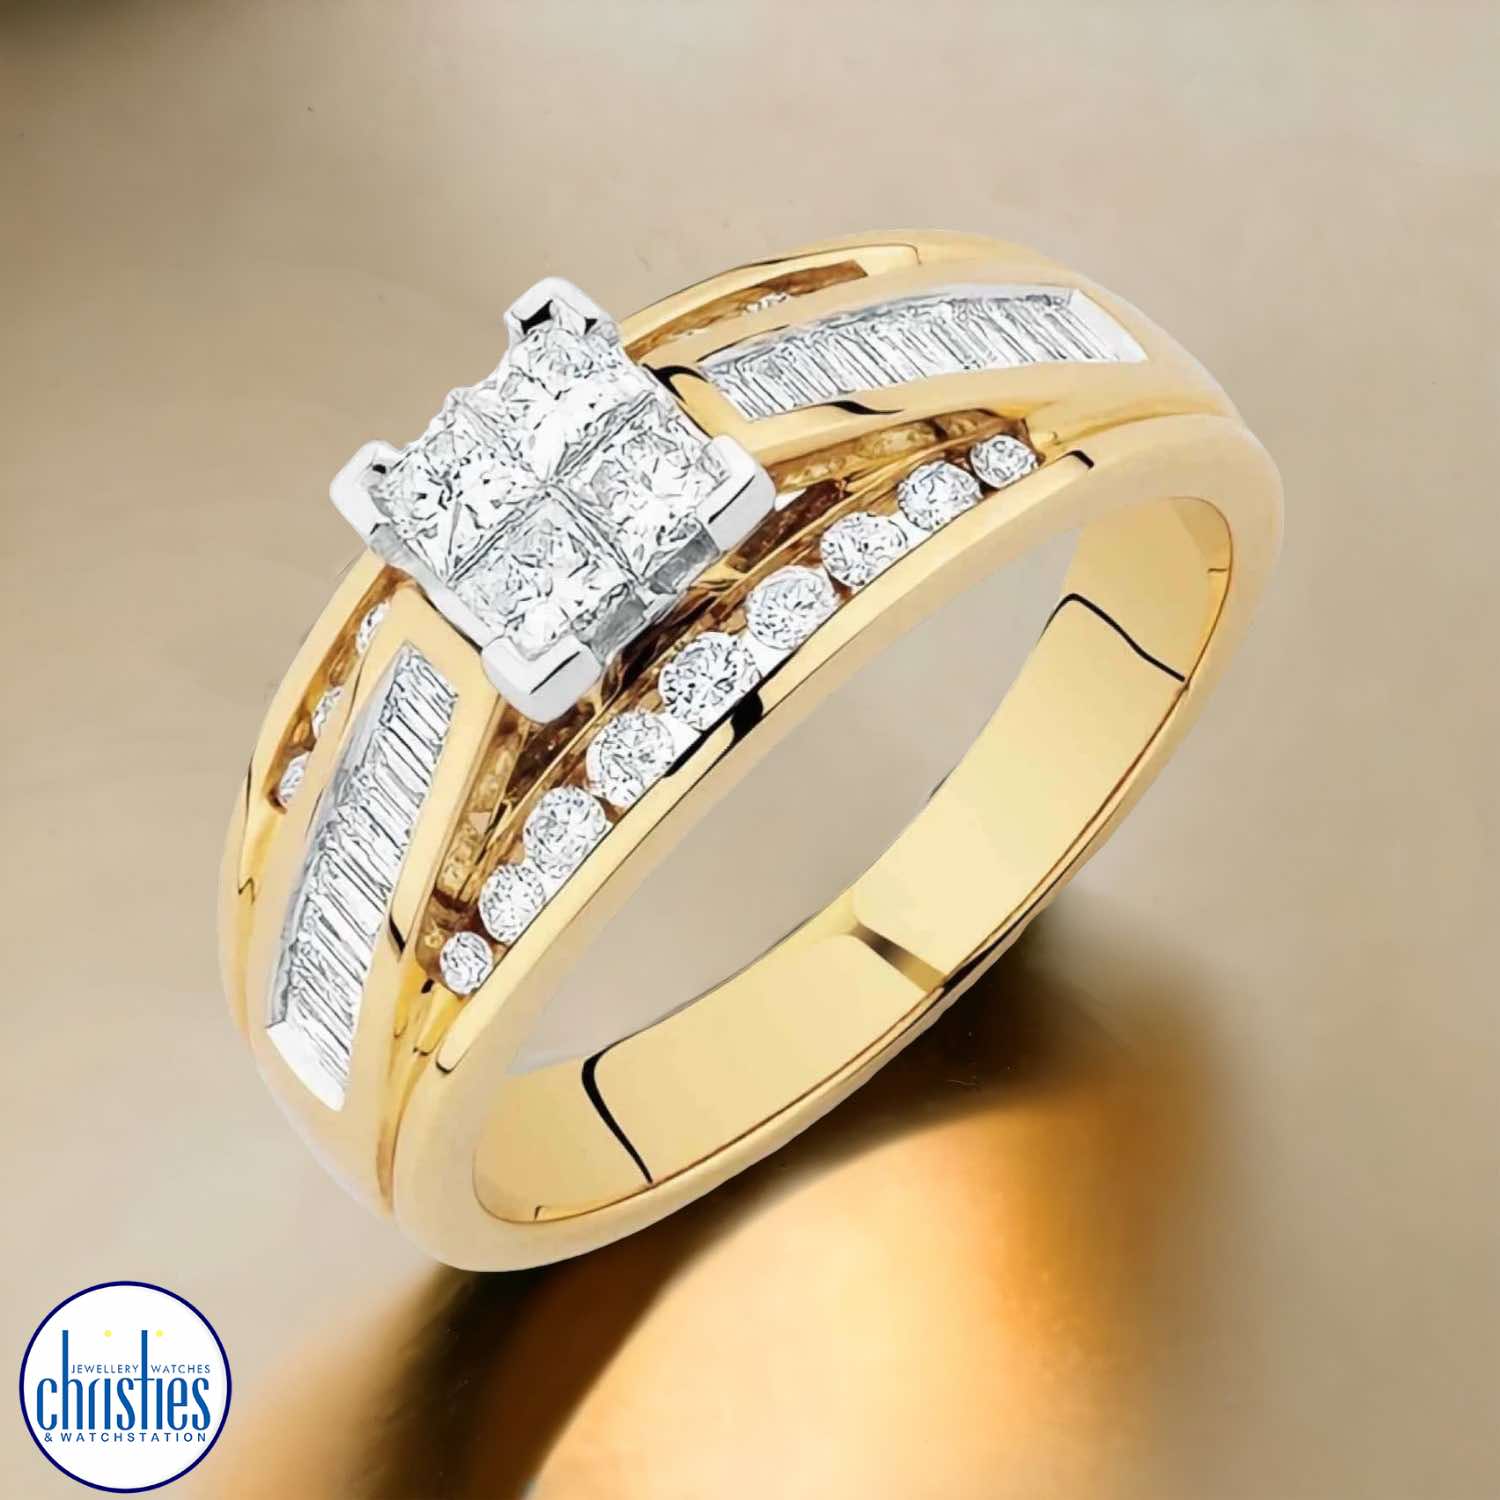 18ct Yellow Gold Diamond Ring 1.00ct TDW  RB23992. 18ct Yellow Gold Diamond Ring with 1 carat of diamonds in totalHumm - Buy ‘Big things over $1000’ - Get approved online or in-store for up to $10,000.